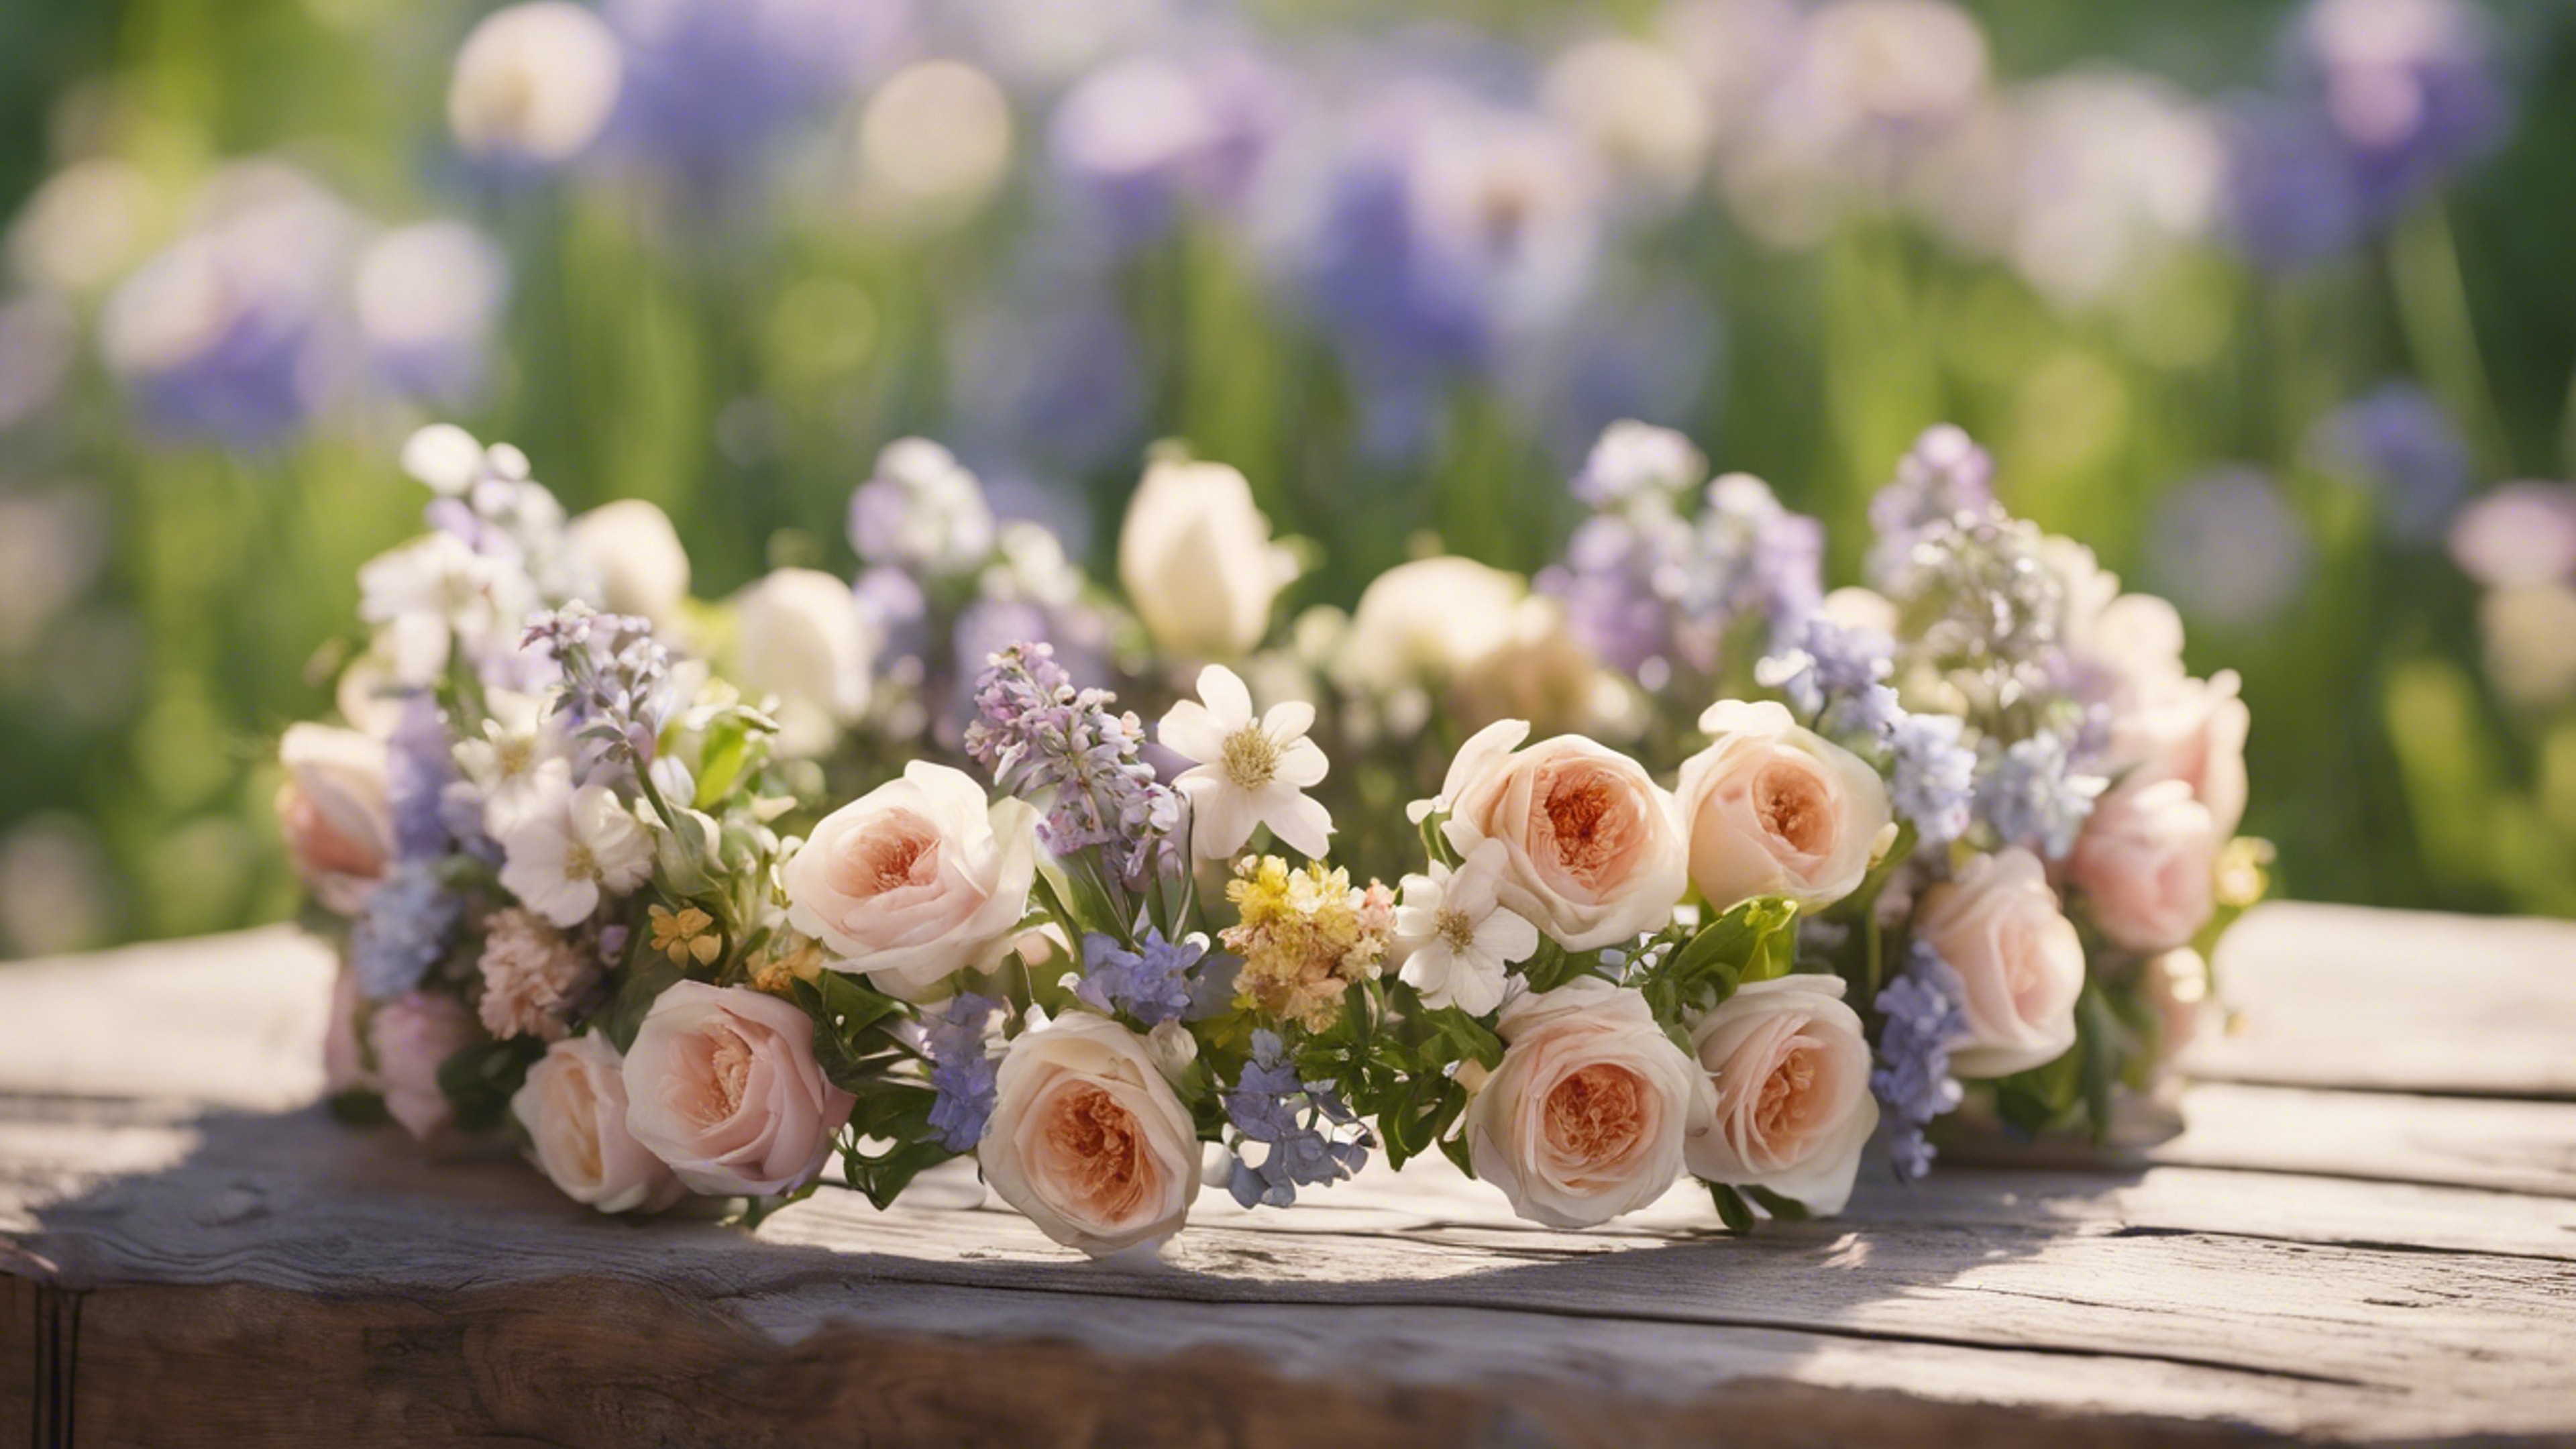 A crown made of fresh spring flowers on a wooden table outdoors.壁紙[d5115d6a32bf47389ae3]